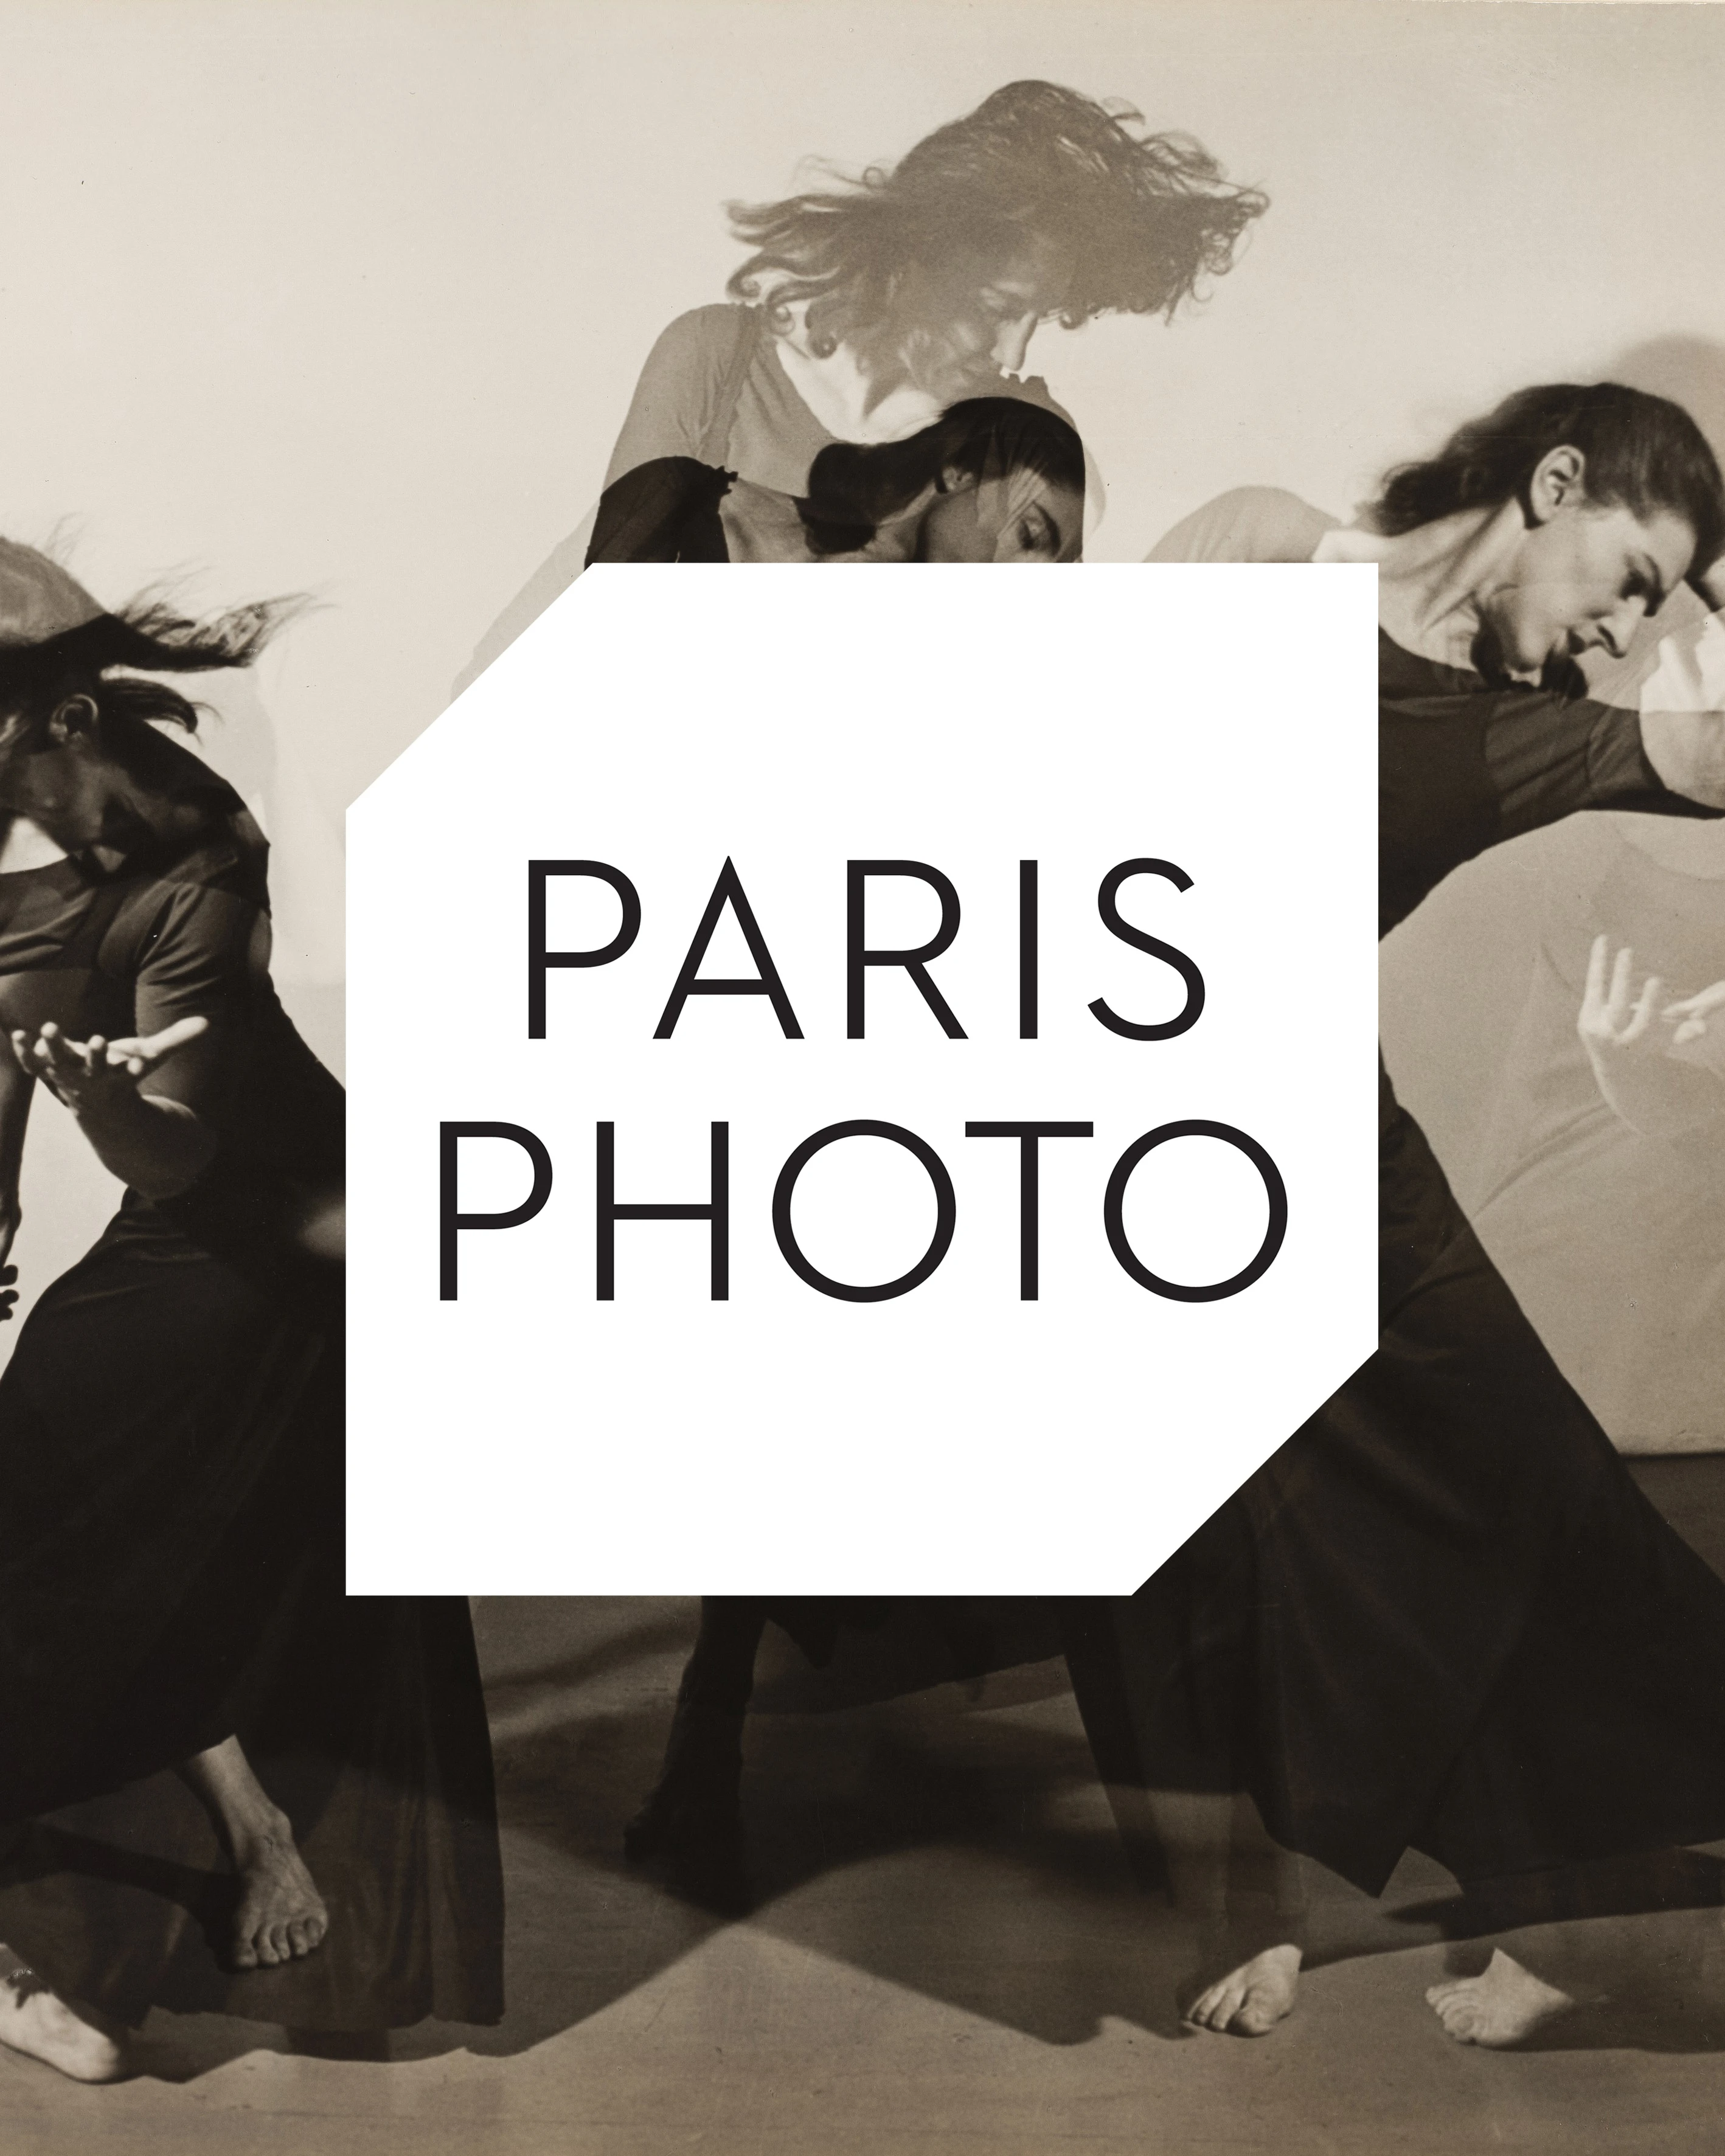 woman dancing with a large print of the Paris Photo logo in the middle - Photo: Barbara Morgan.